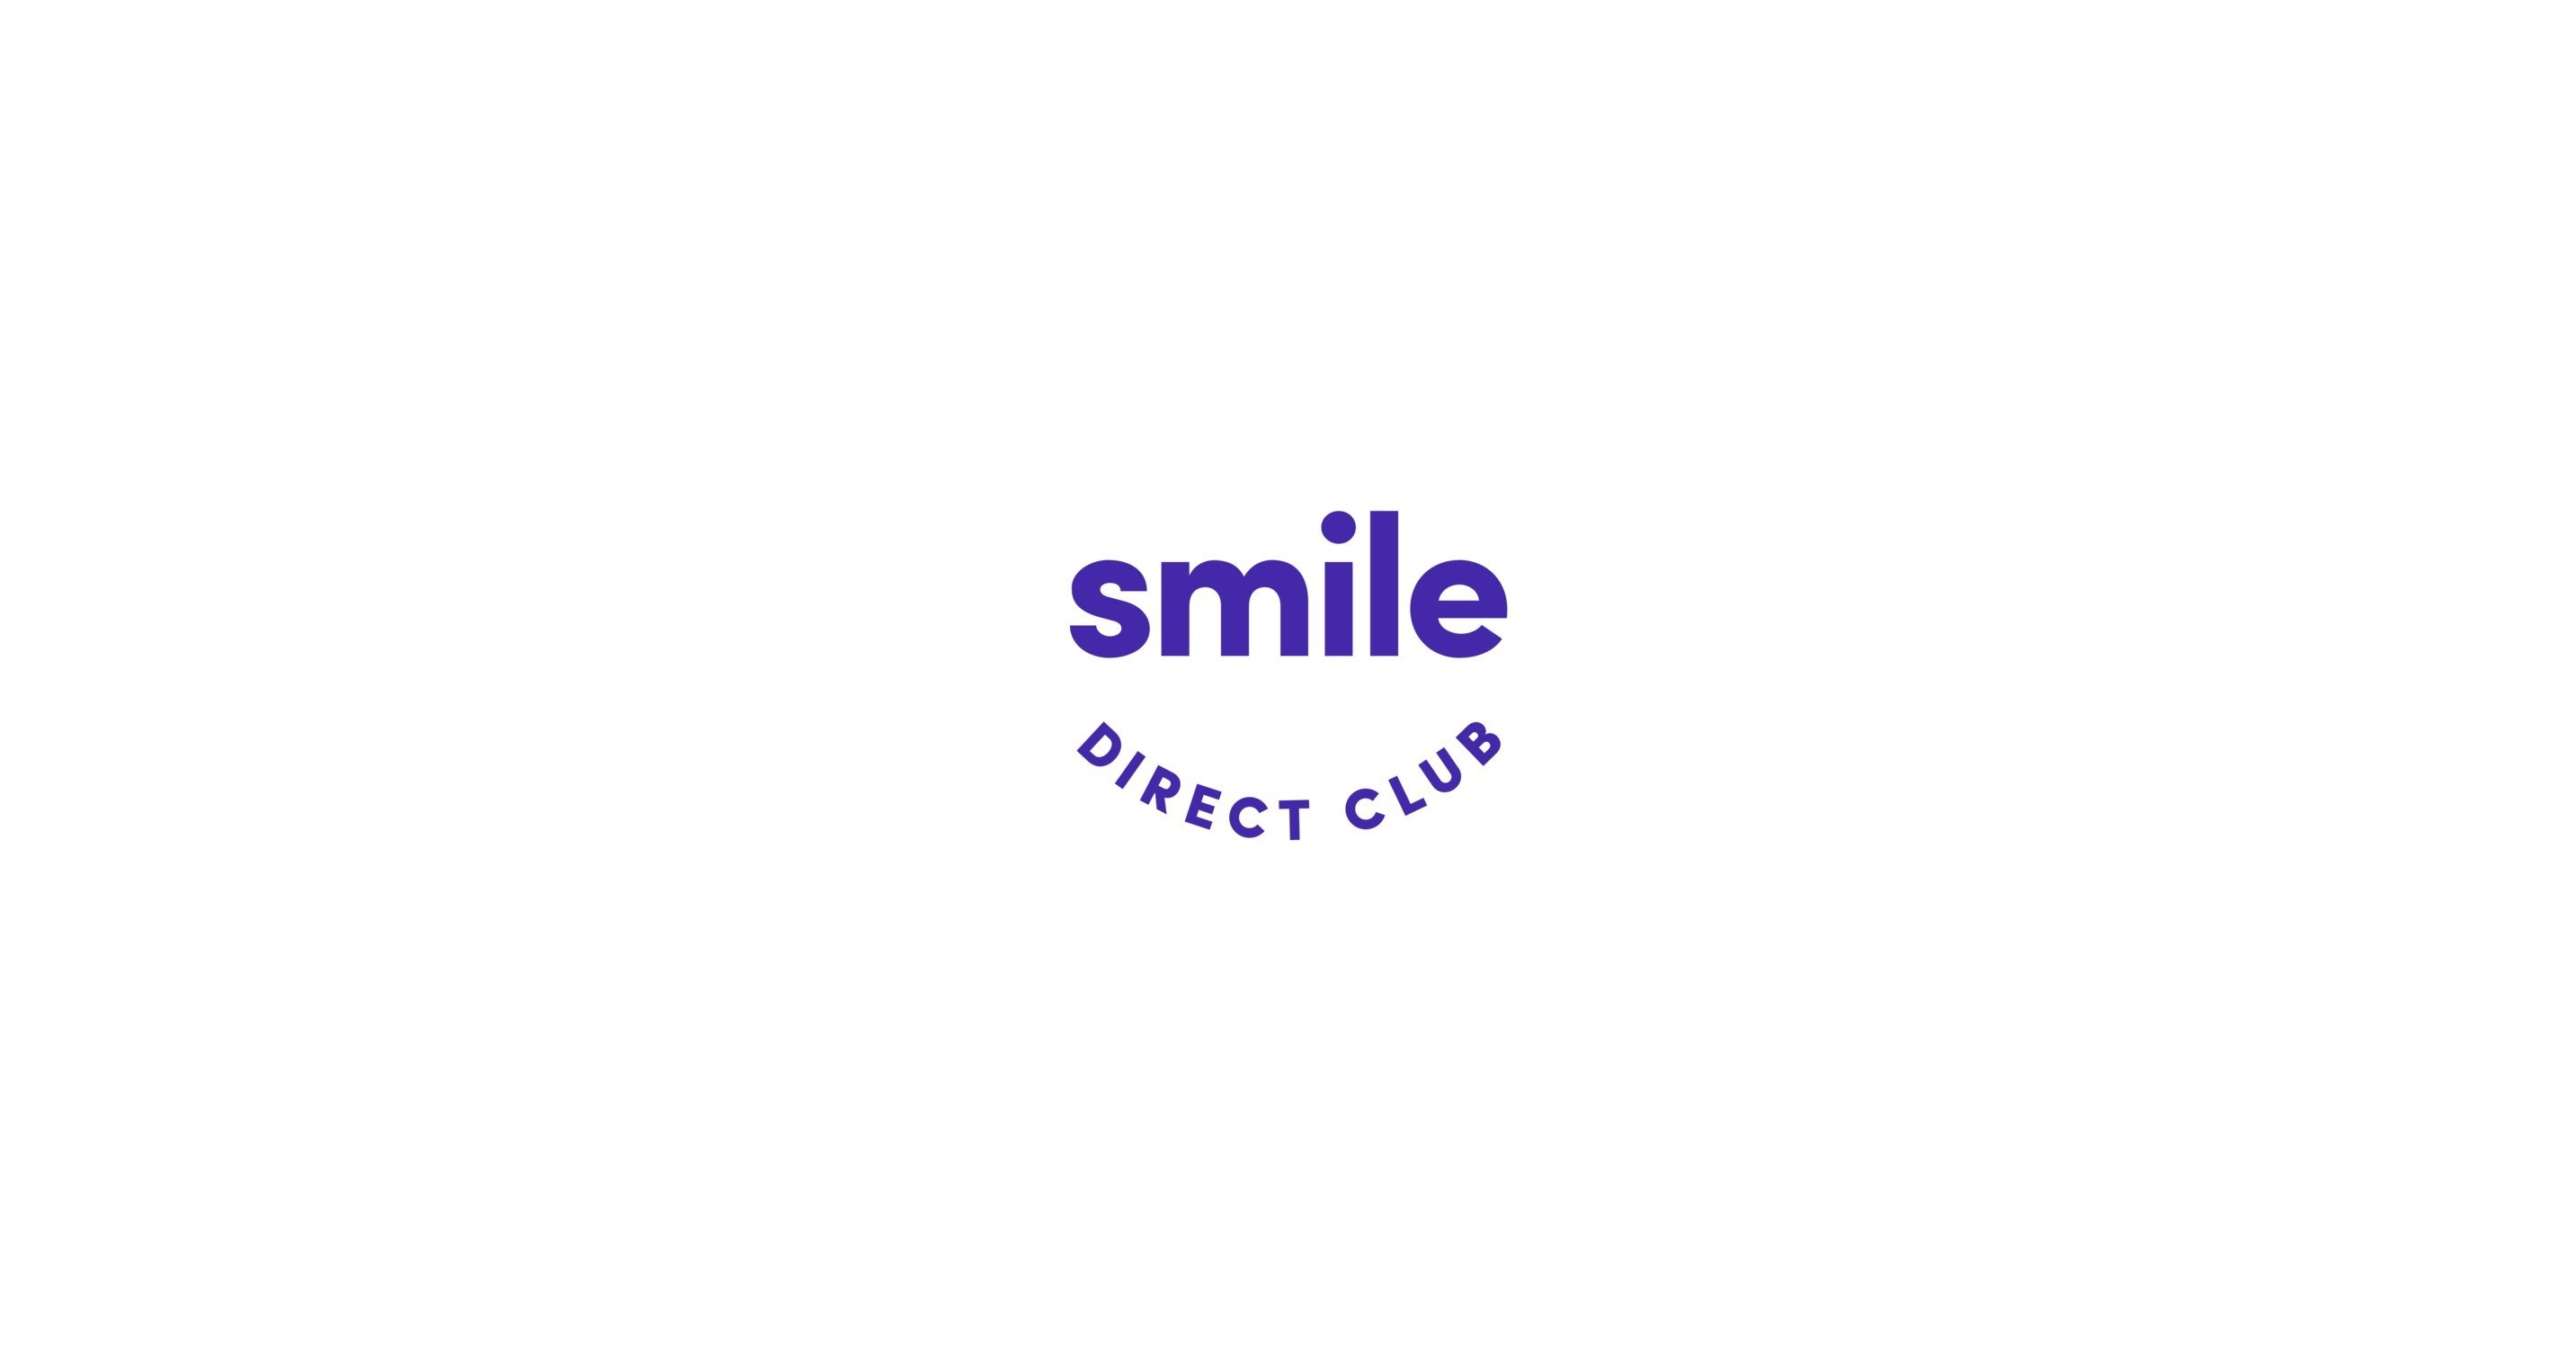 smiledirectclub-continues-to-disrupt-the-status-quo-fights-for